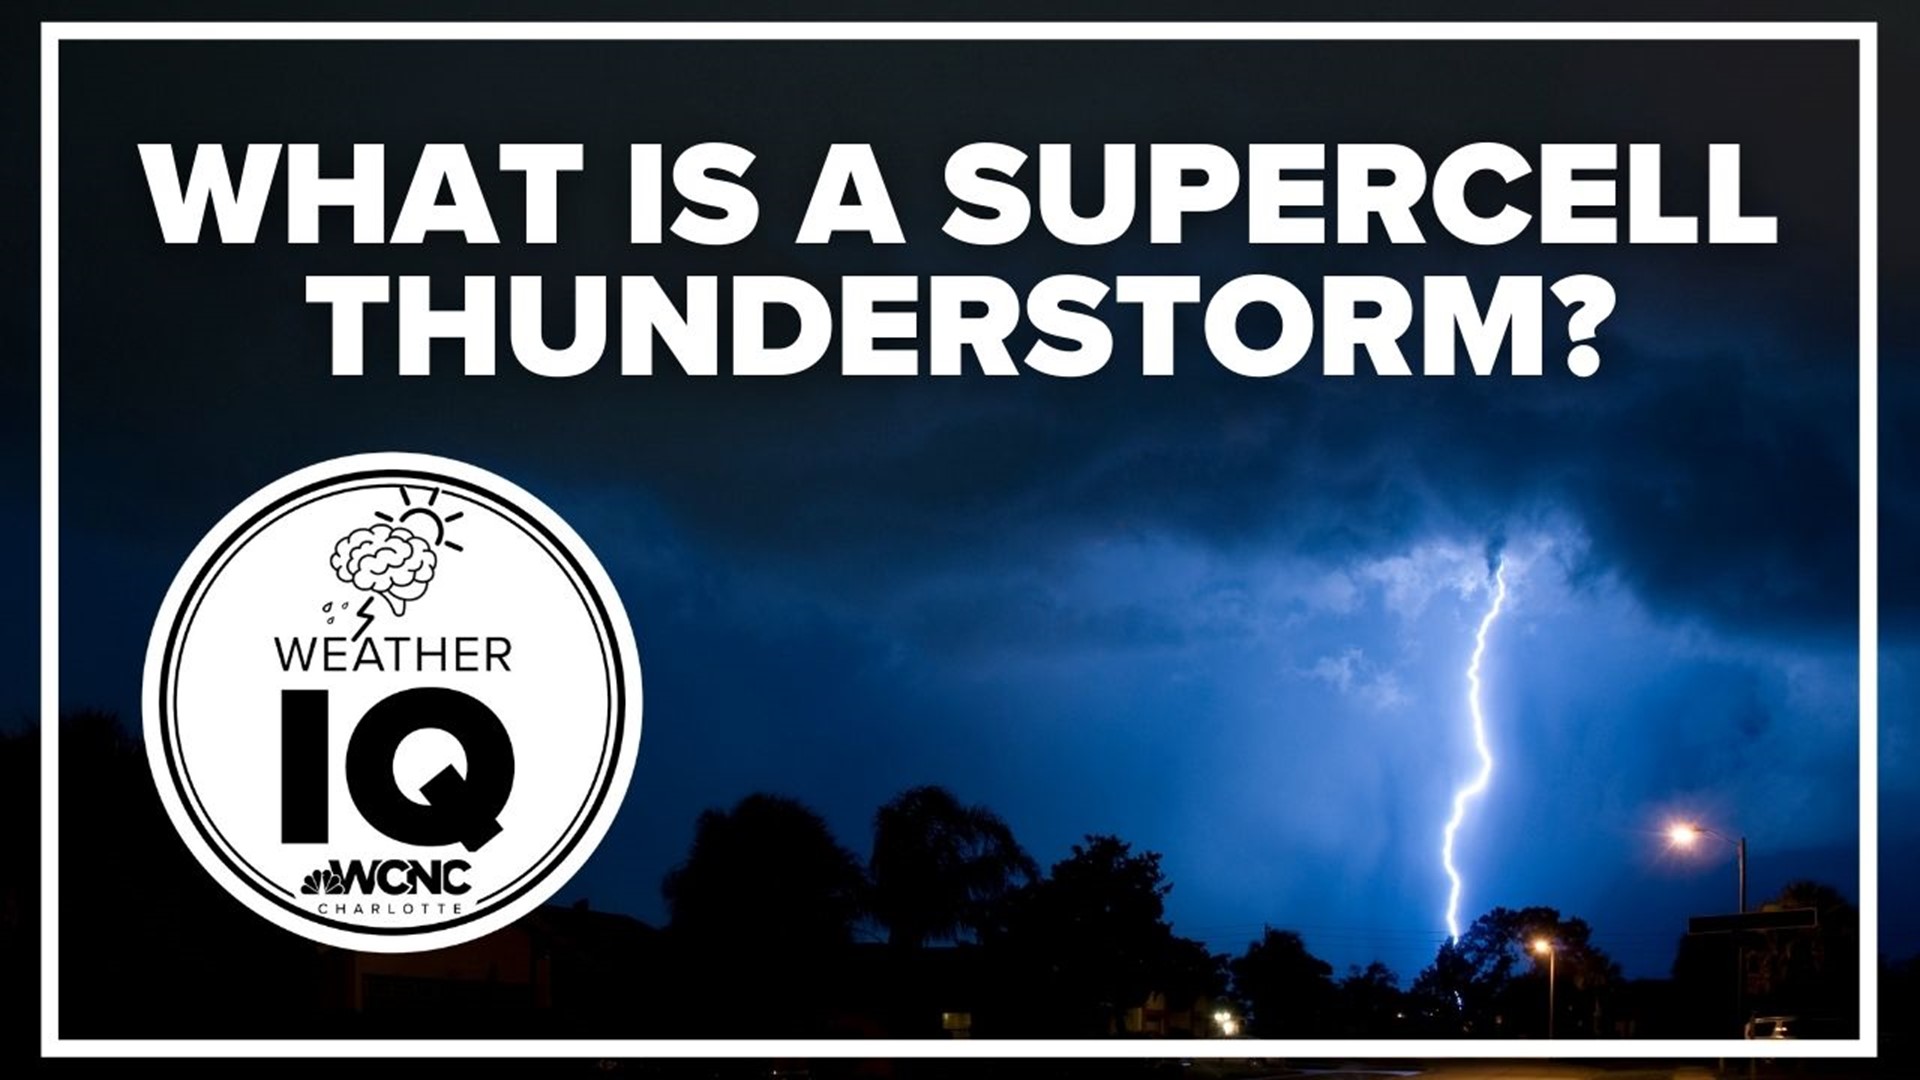 Supercells are the least common type of thunderstorm, but they can be very destructive, causing hail, damaging winds and tornadoes.